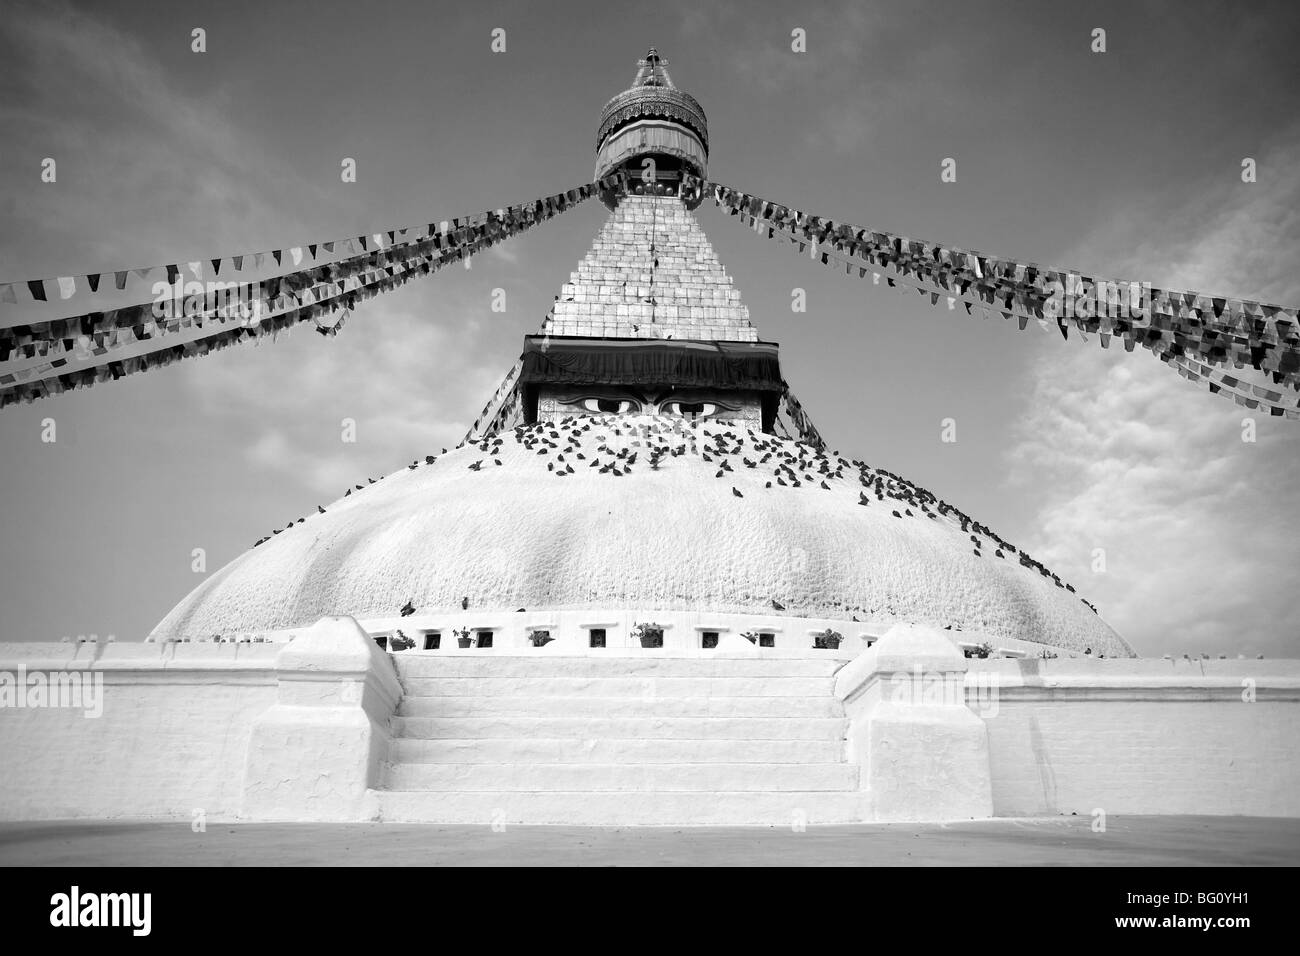 Bodhnath stupa in Kathmandu, Nepal is an UNESCO World Heritage Site and one of the largest stupas in the world Stock Photo